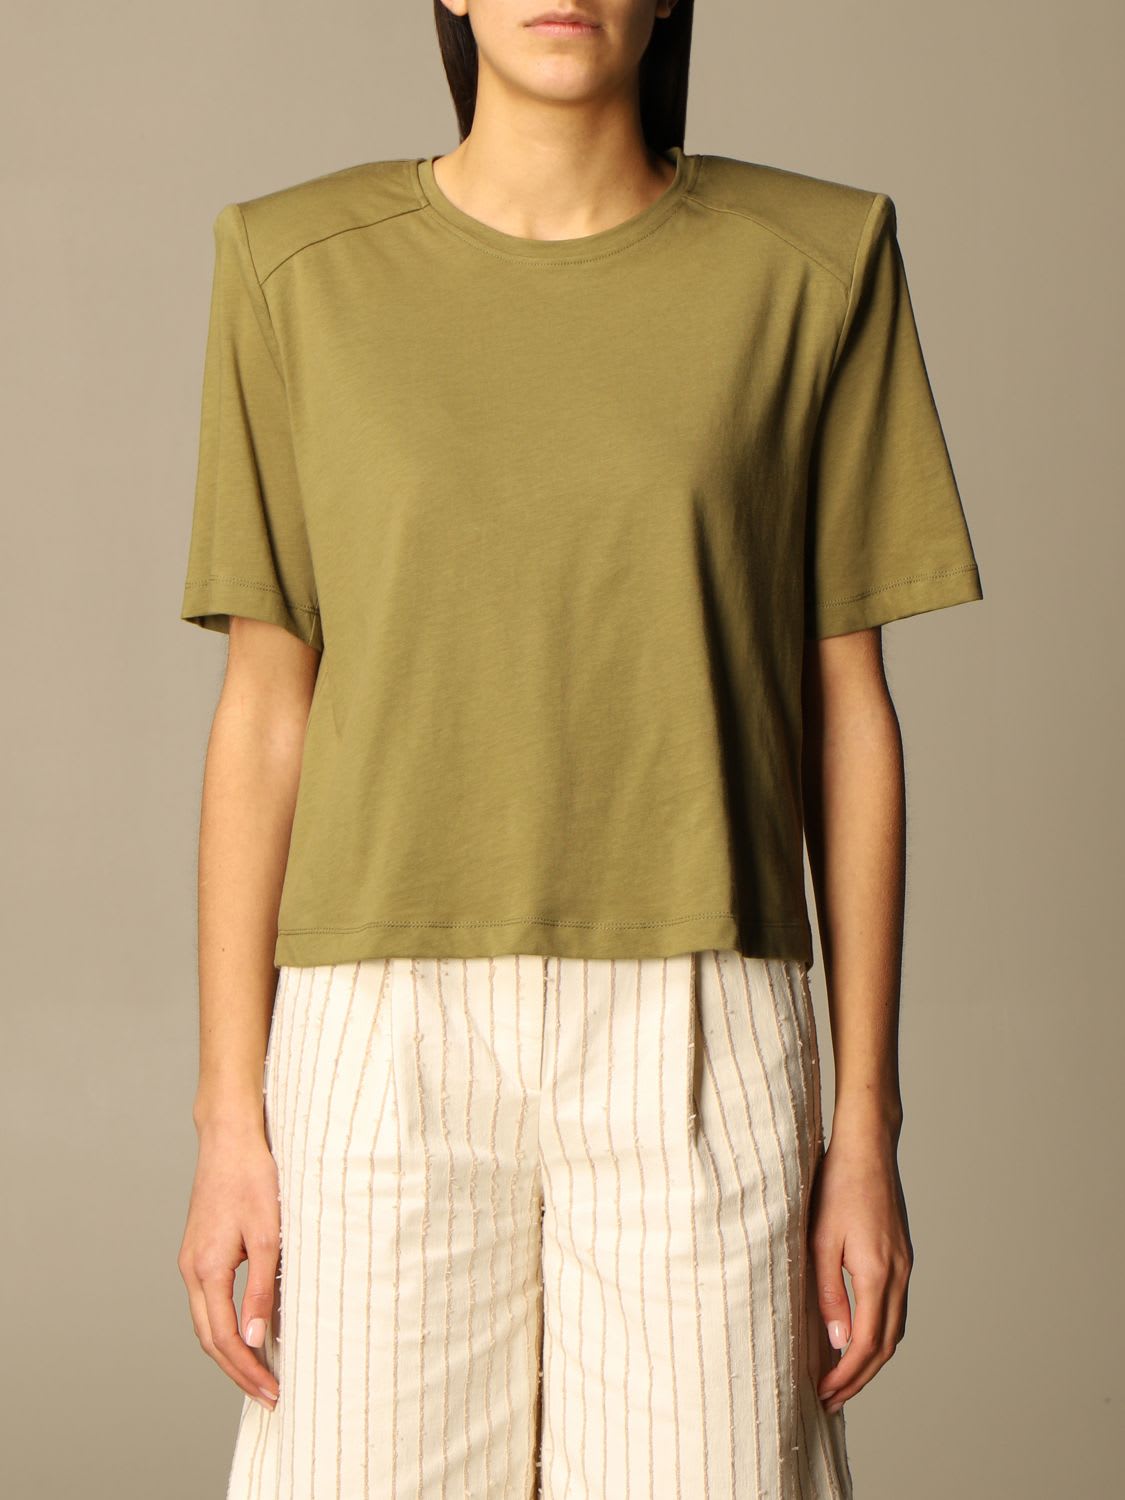 Federica Tosi T-shirt Federica Tosi Basic T-shirt With Padded Shoulder Straps